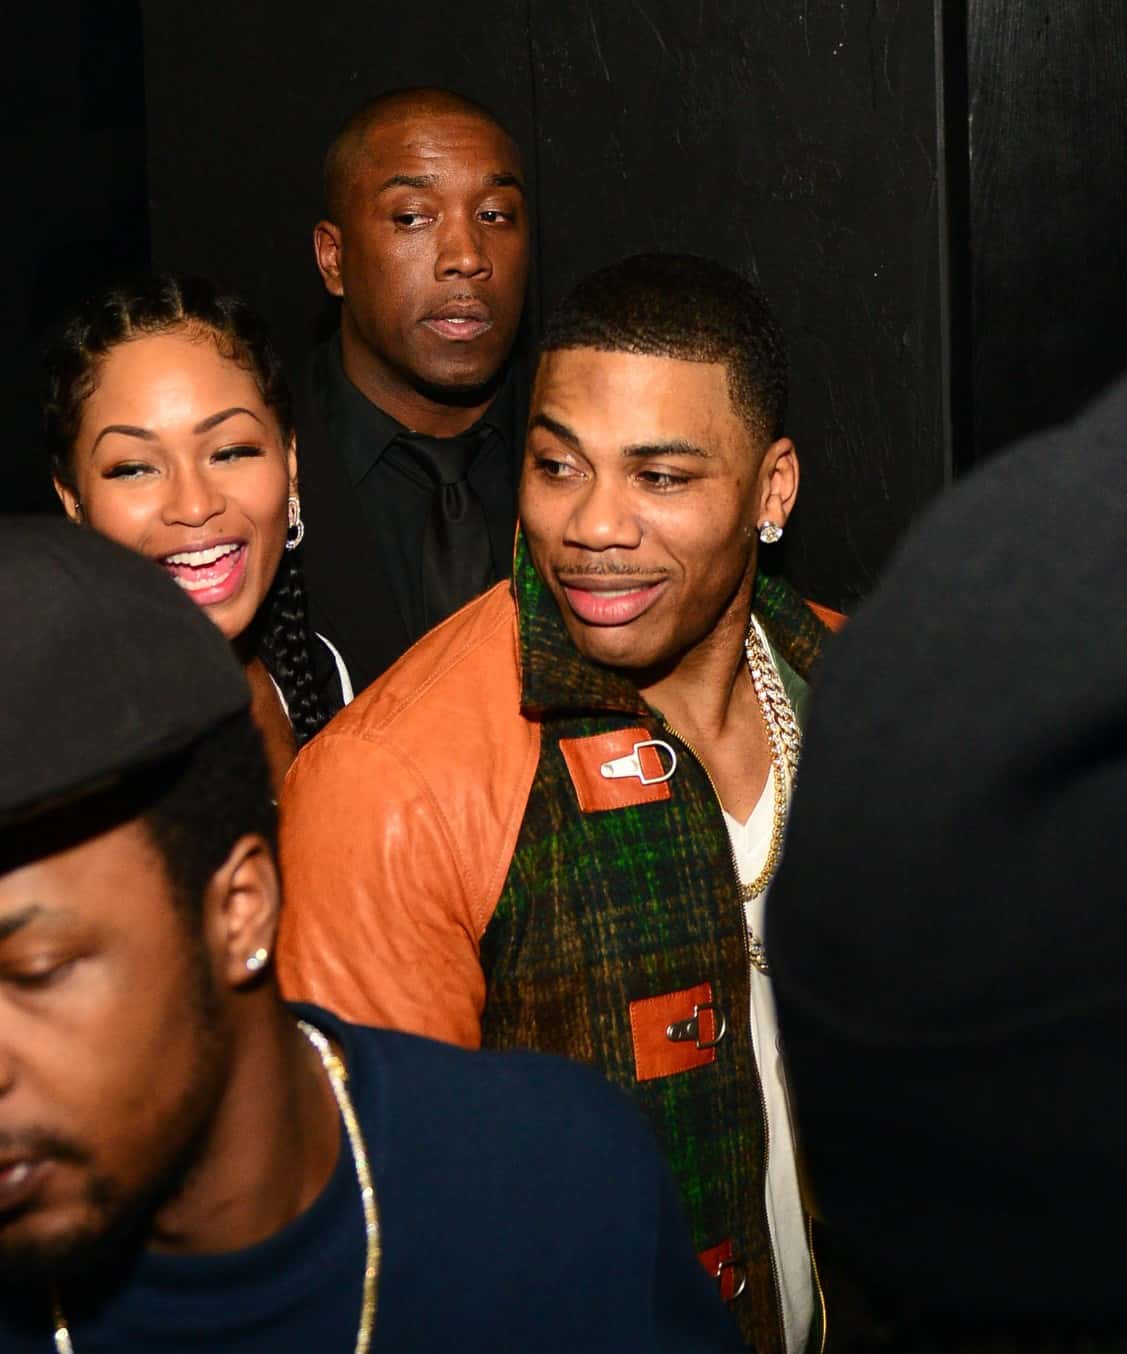 Image of La'Shontae Heckard with her former partner, Nelly